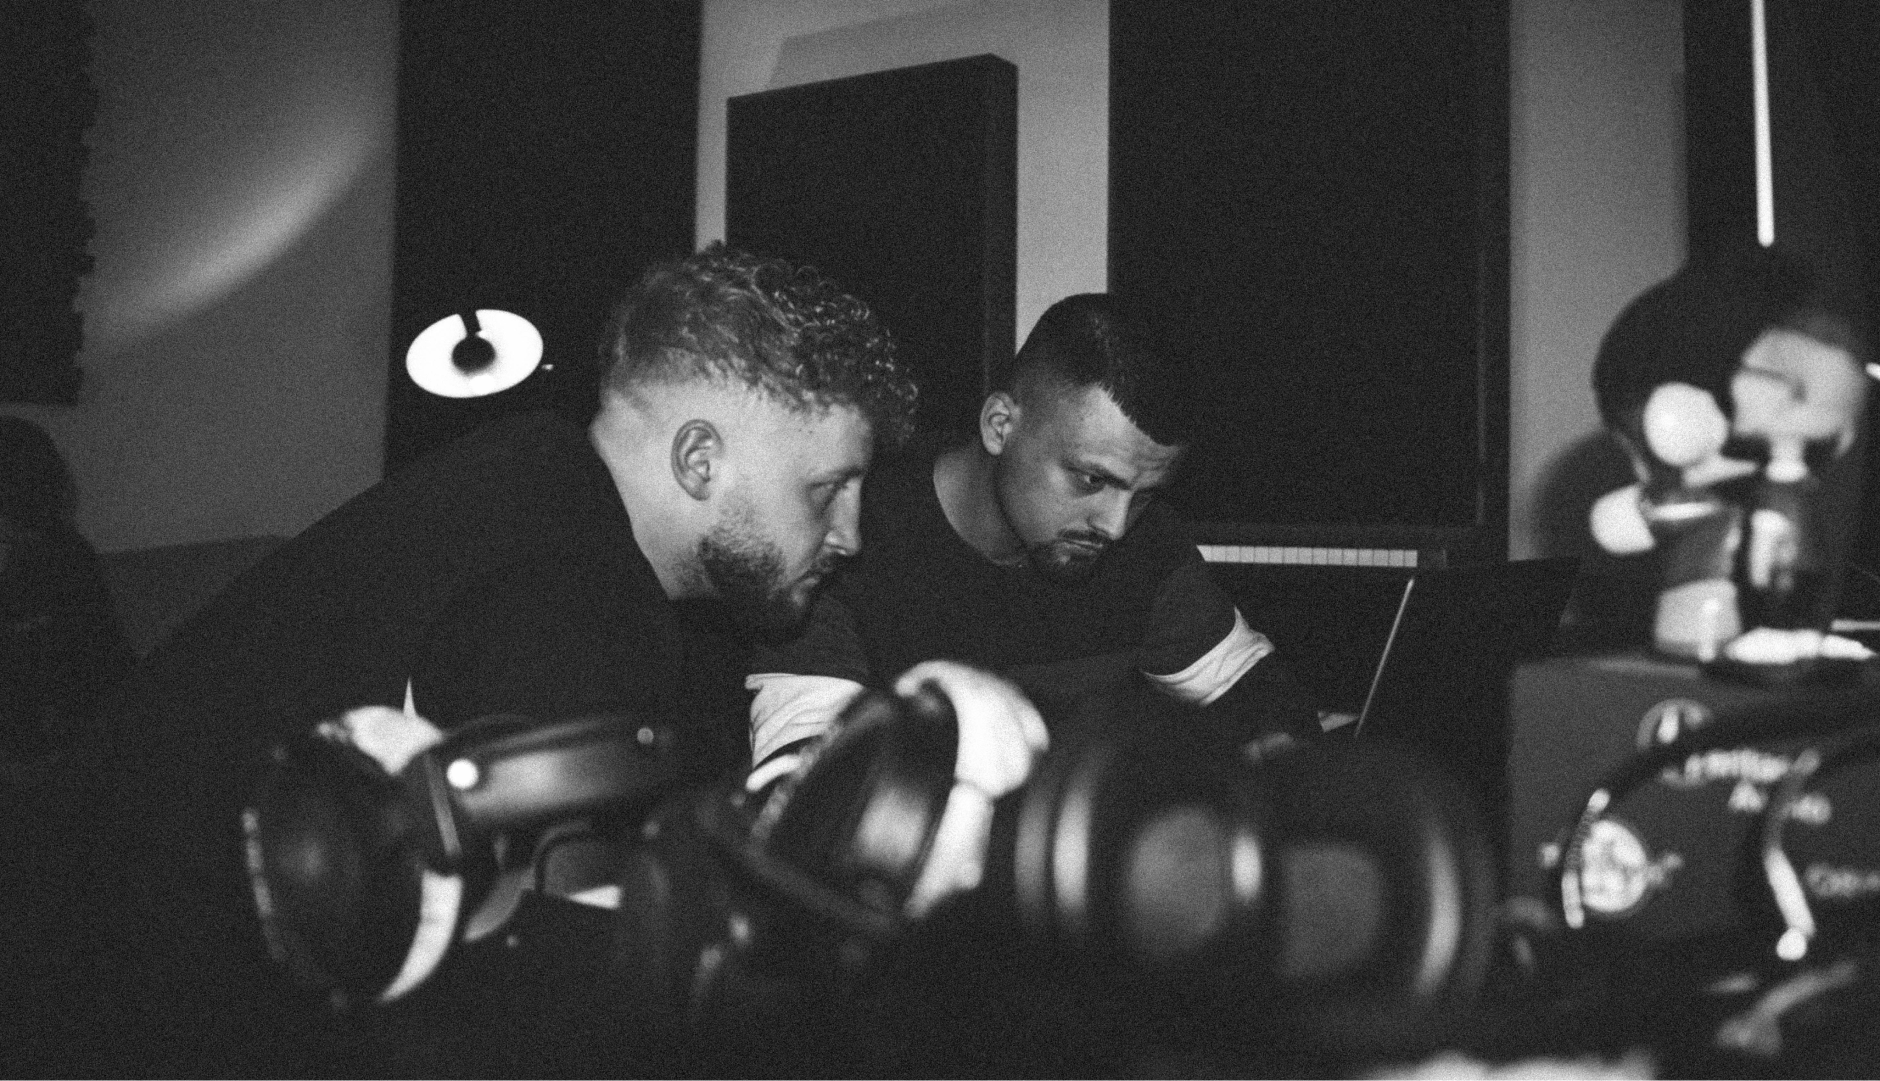 "The most important thing is to just release" - producer duo Joskee in interview